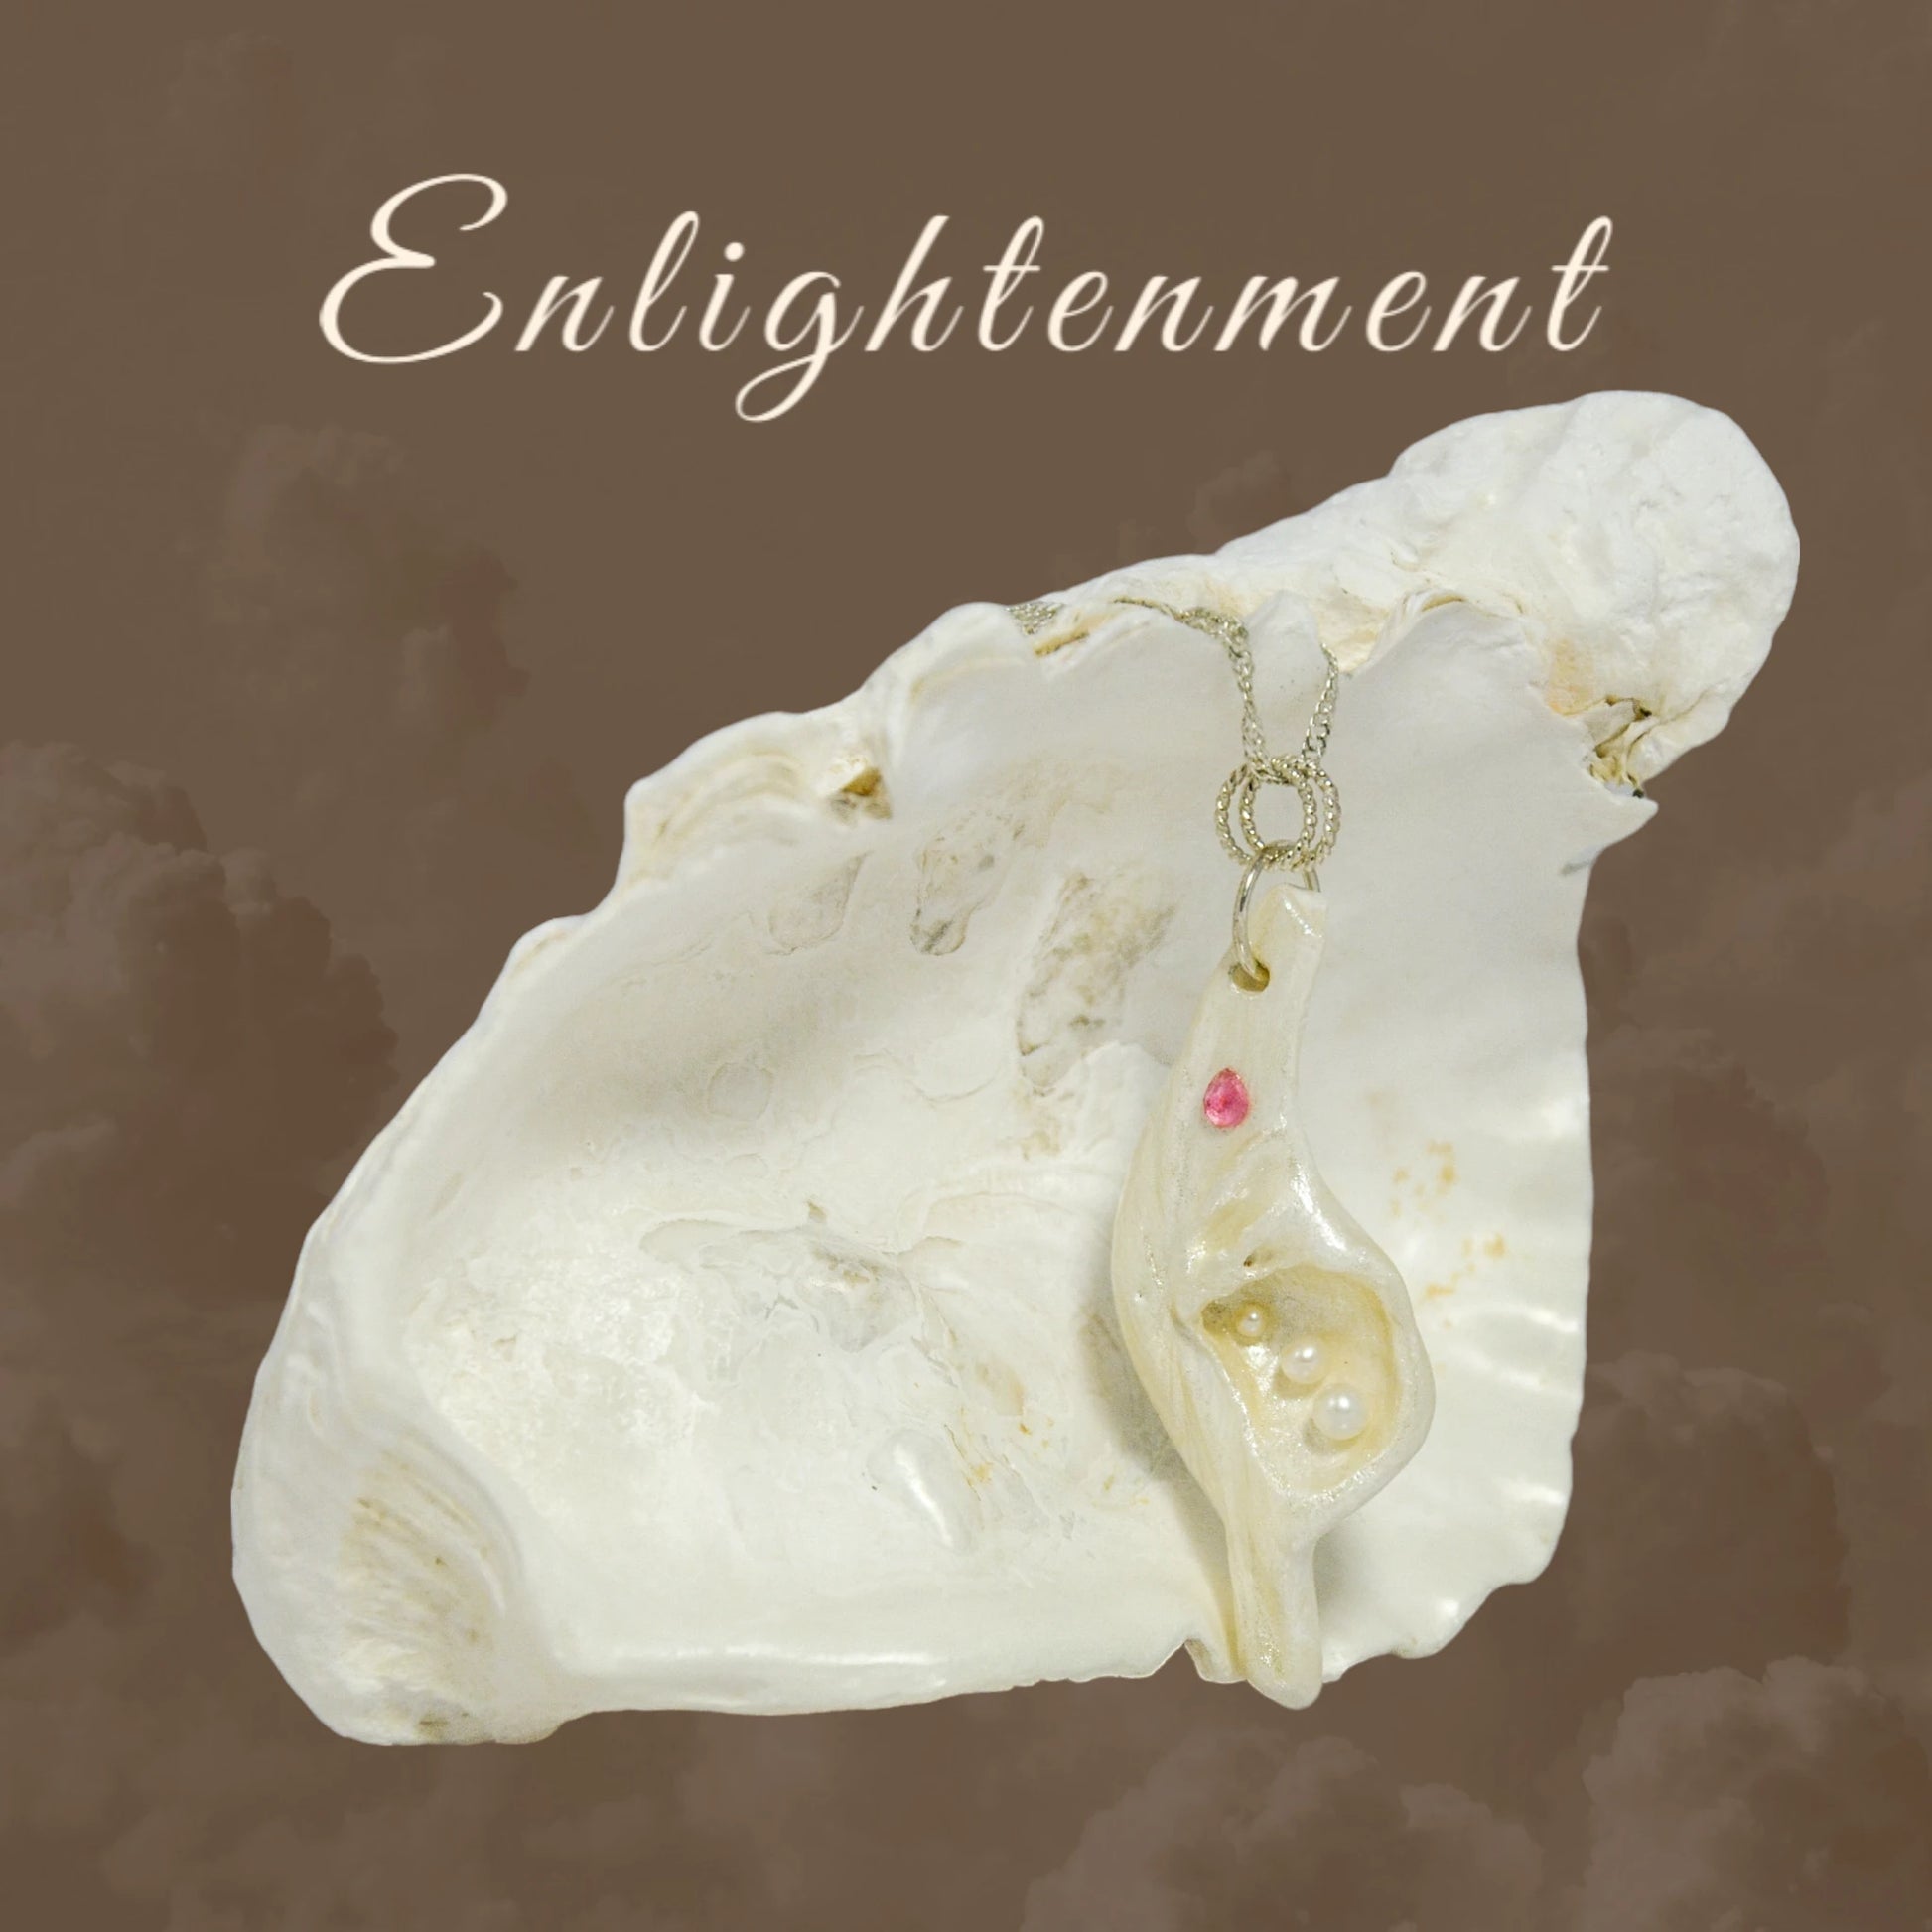 A trio of white baby freshwater pearls and a teardrop rose cut pink tourmaline gemstone compliments the seashell pendant beautifully. The pendant is shown hanging on a larger seashell.  The word enlightenment is printed at the top of the image.